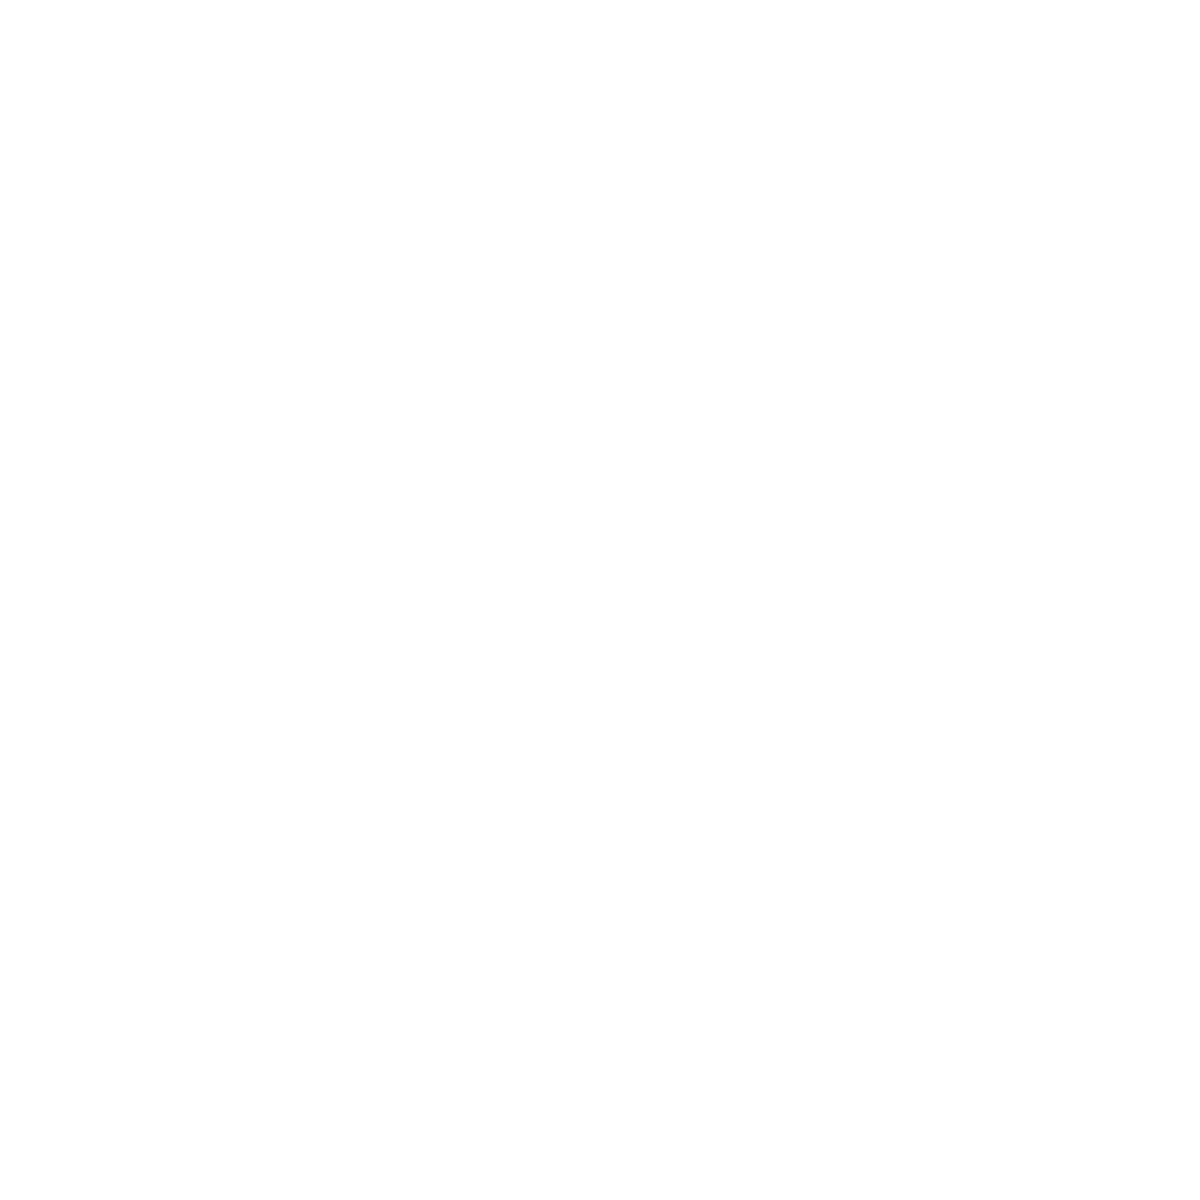 Fire Life & Safety Compliance badge icon